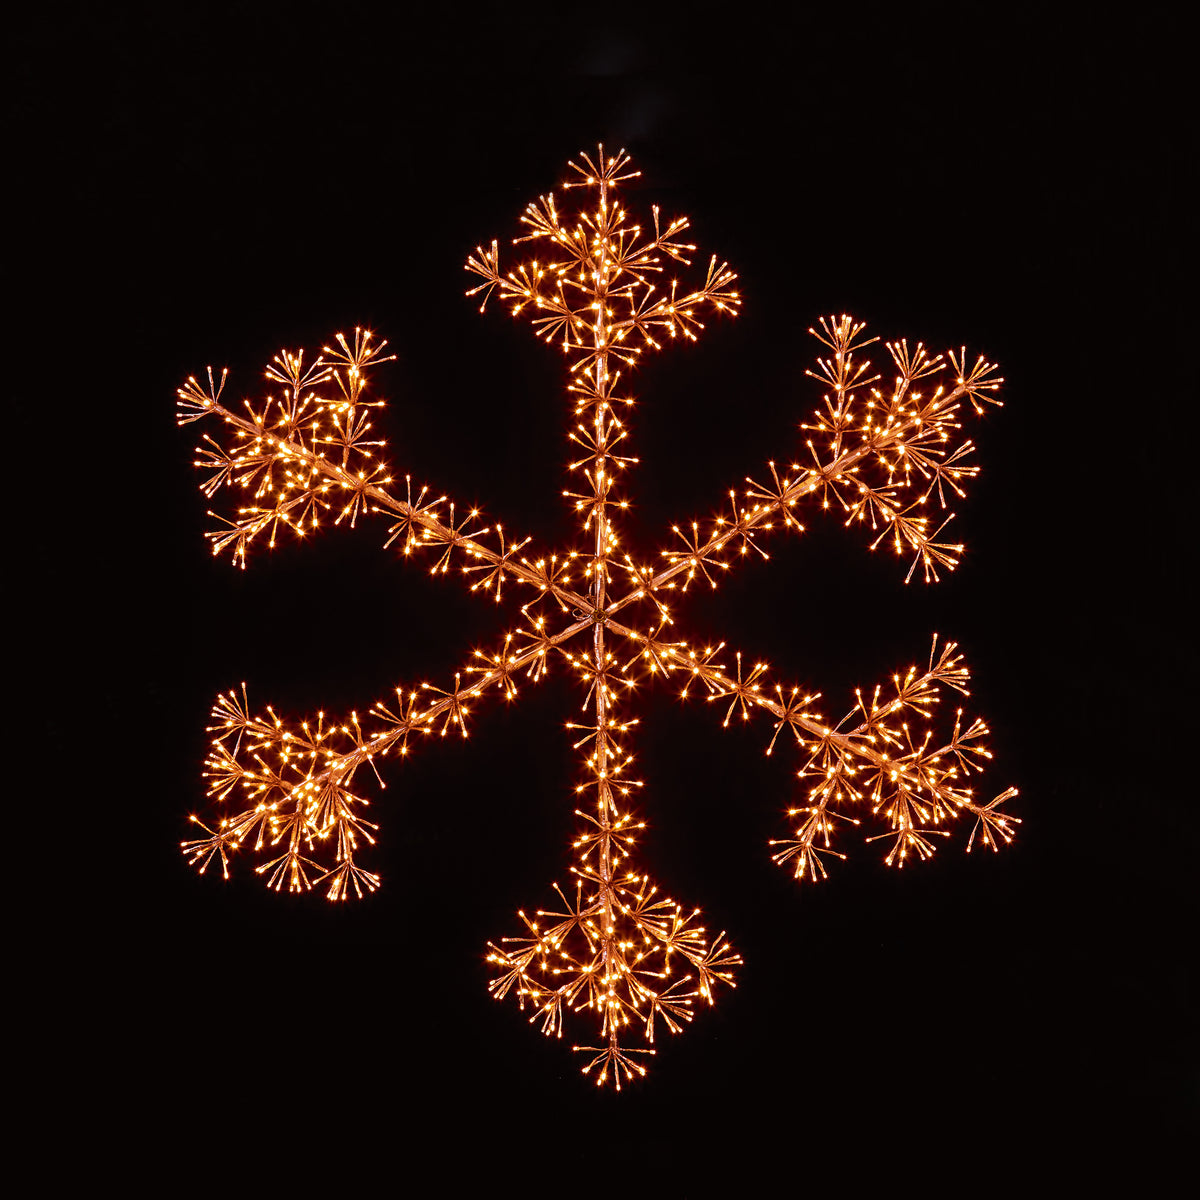 1.5m Giant Rose Gold Starburst Snowflake Silhouette with 1080 Warm White LEDs